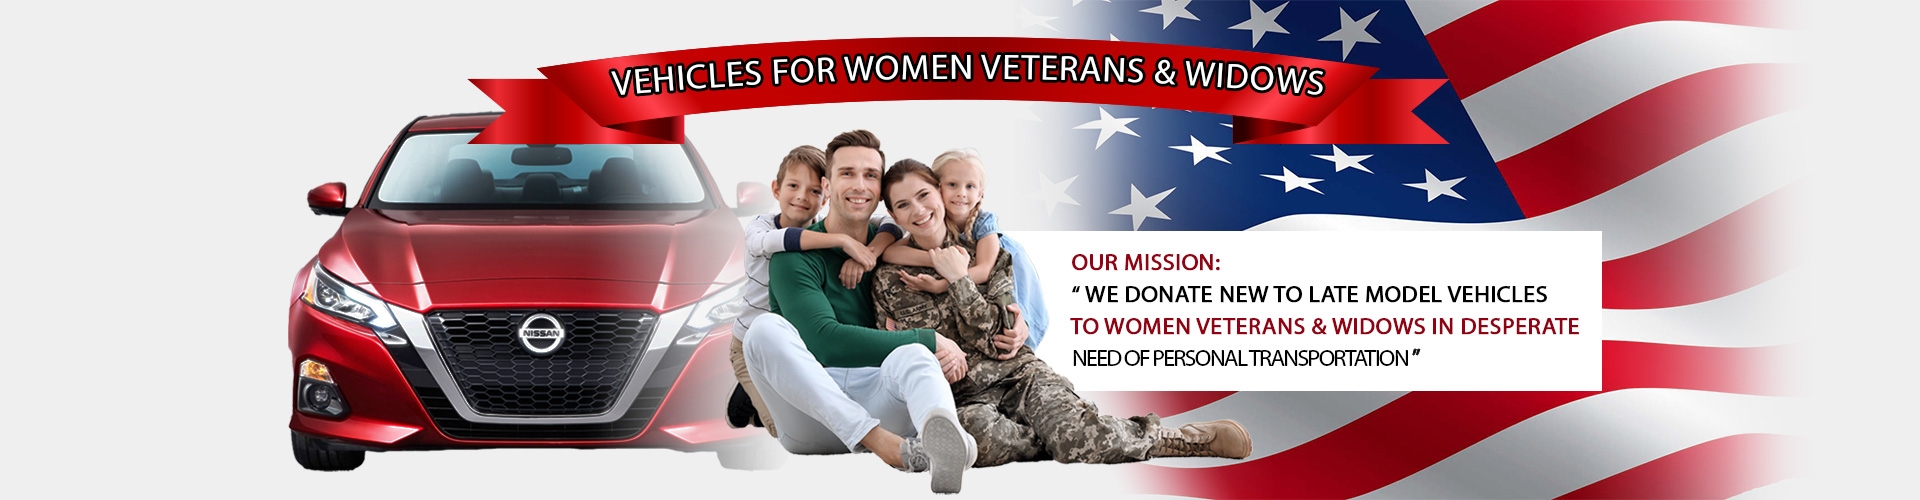 Vehicles For Women Veterans and Widows